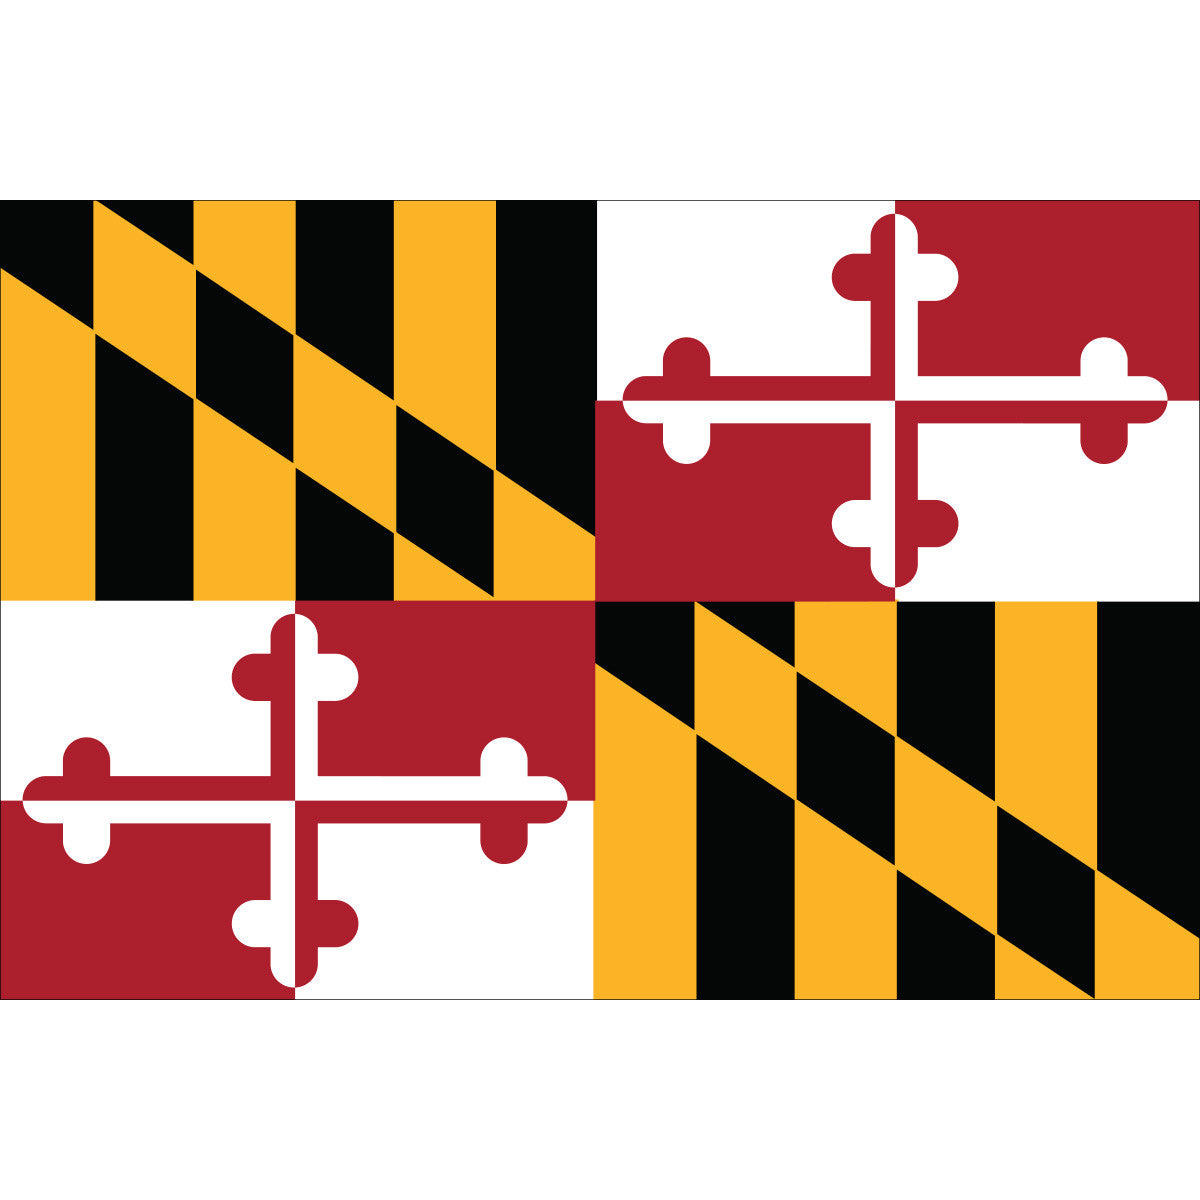 Maryland State Flags